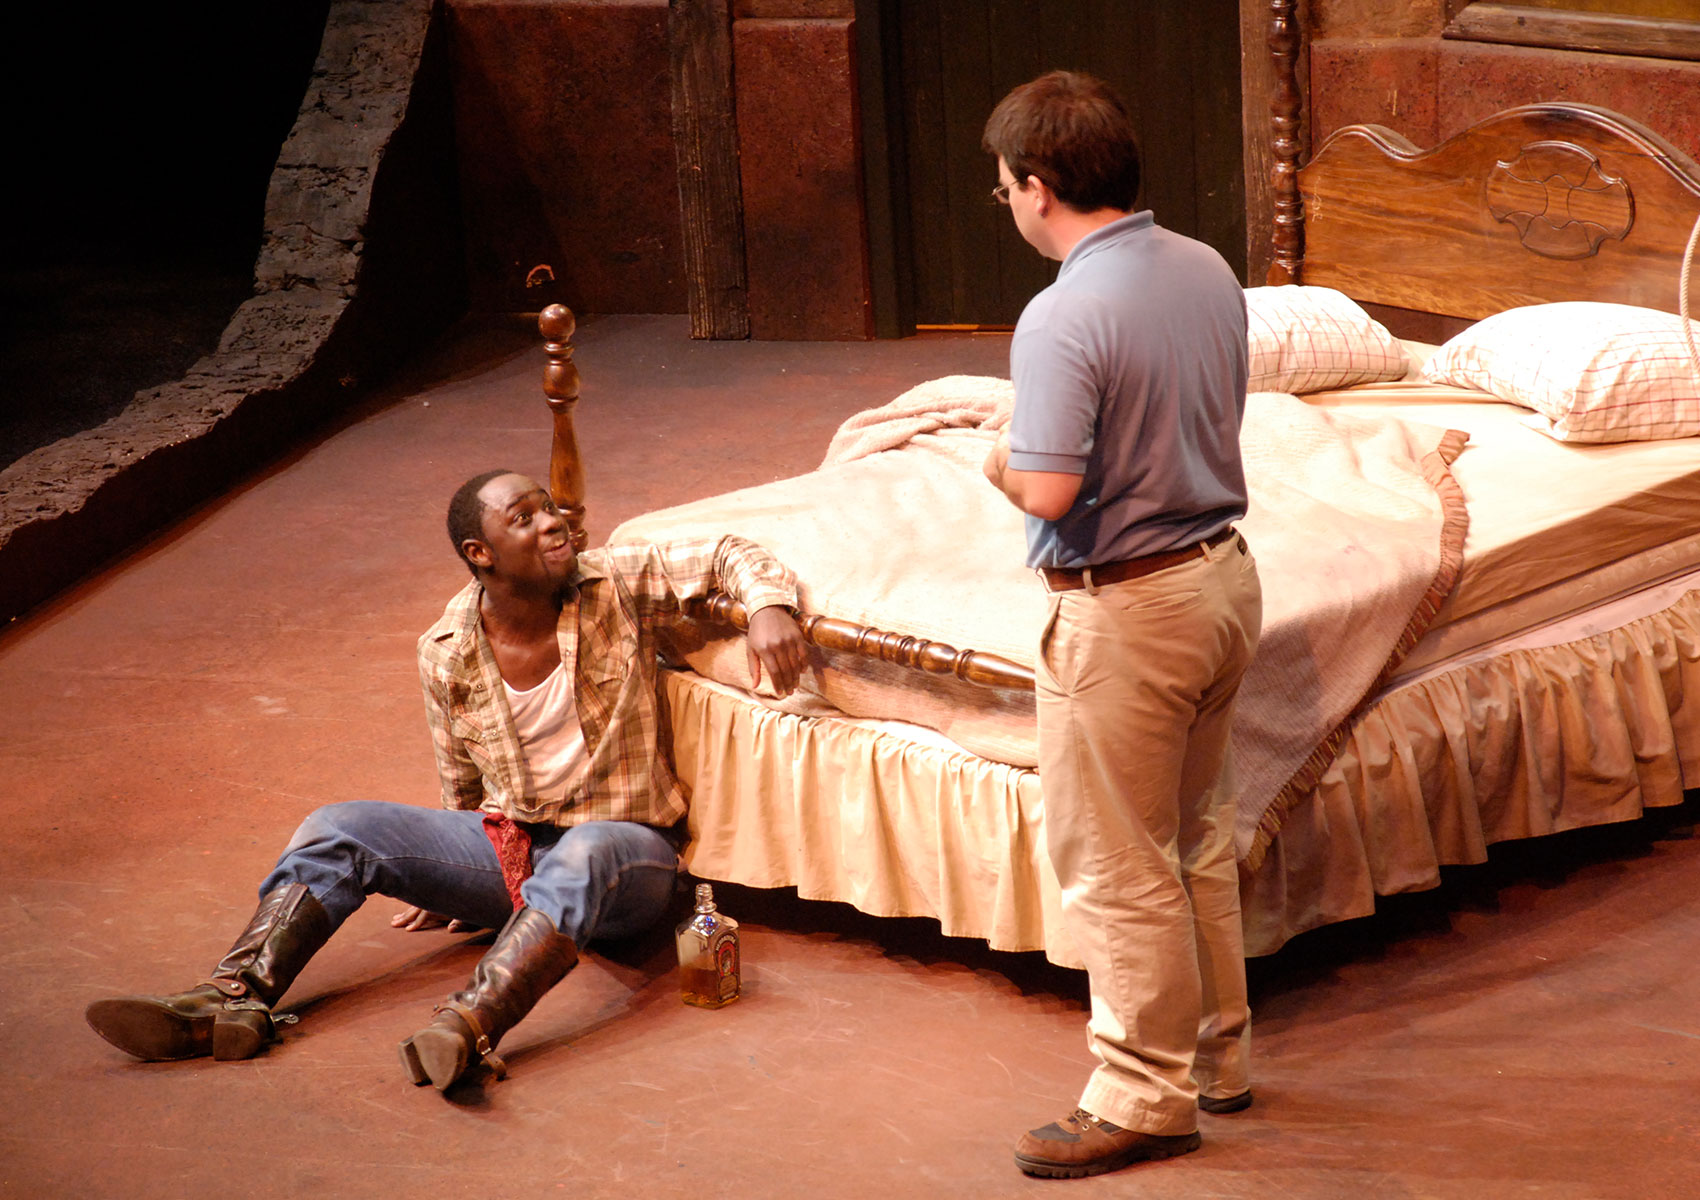 A man is on the floor handcuffed to a bedframe with a bottle of liquor next to him. He is looking up speaking animatedly to another man. 